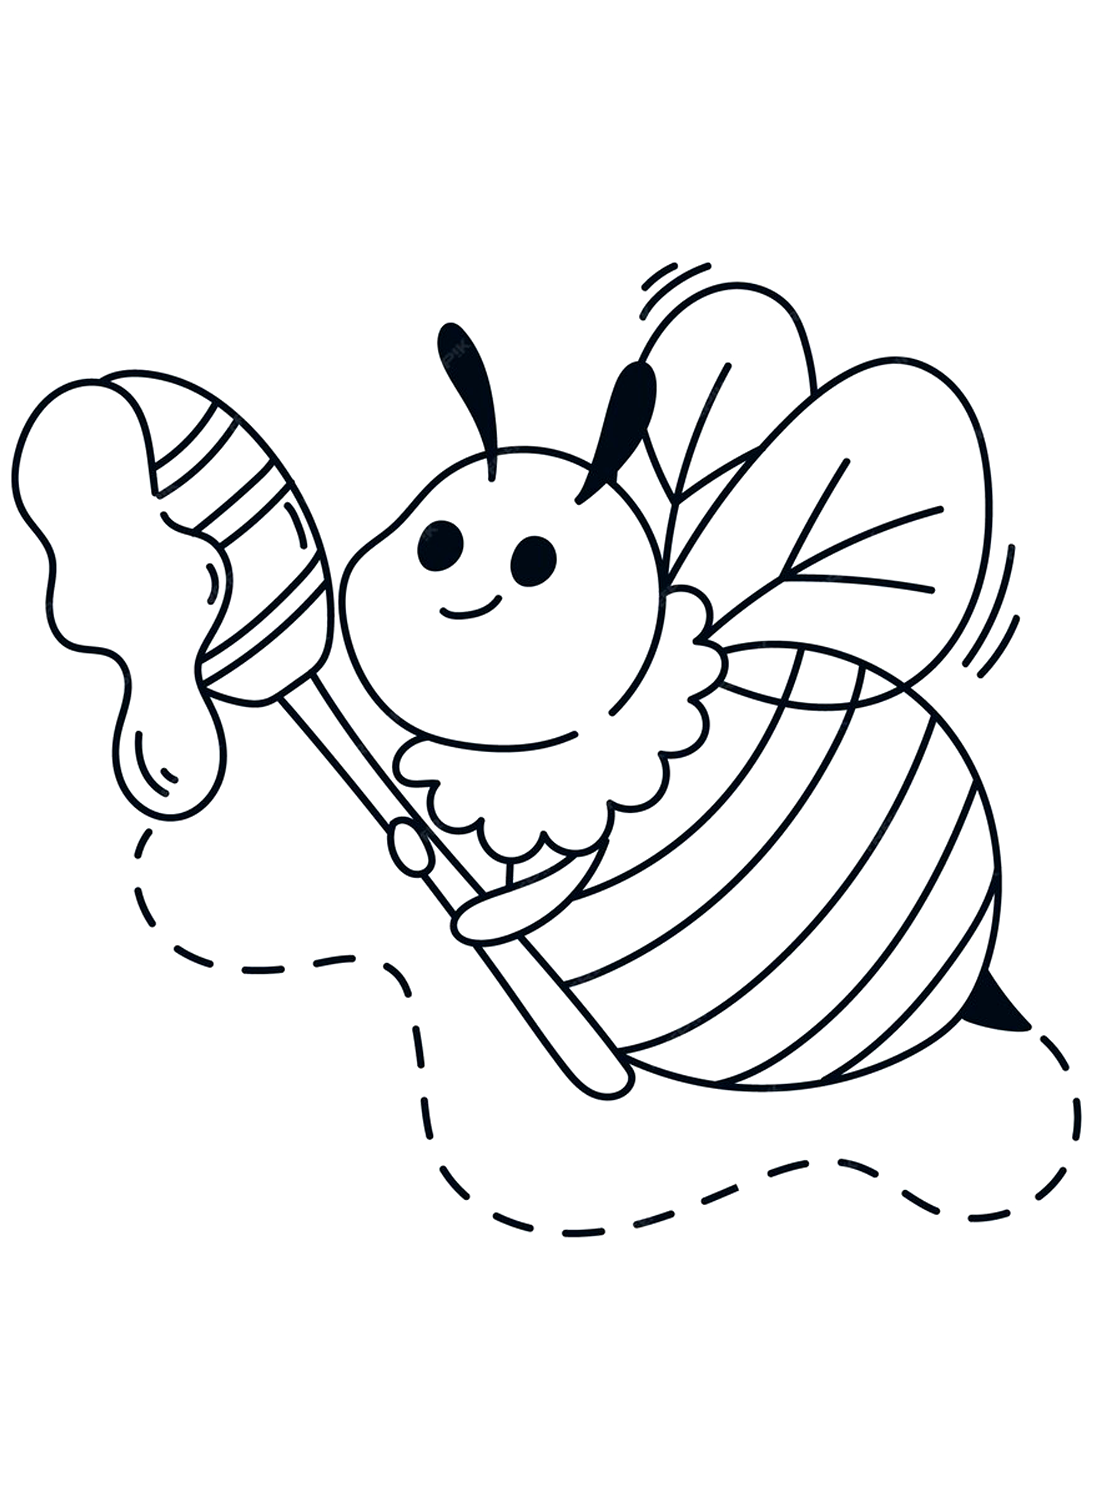 Beehive Coloring Page from Bee